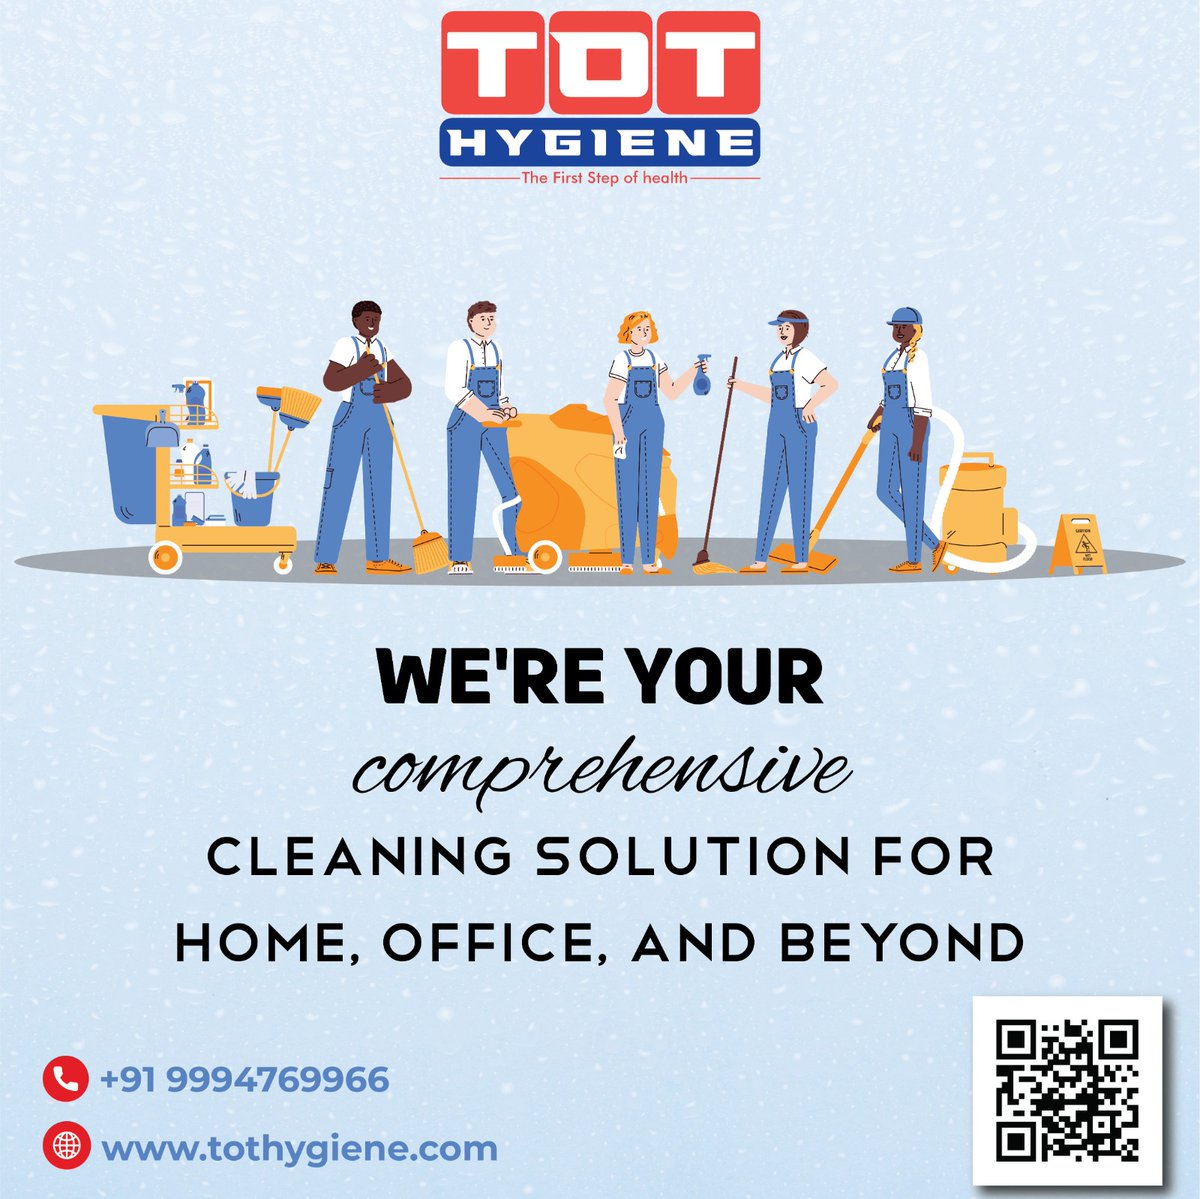 #Coimbatore #TOTHygiene #OneTimeCleaningServices #Cleaningservicenearme #ResidentialPestManagement #CommercialPestManagement #Apartmentcleaningservice #HousekeepingService #OfficeCleaningservices #BestFullHomeCleaningServices #HousekeepingOffice #FloorCleaningServices